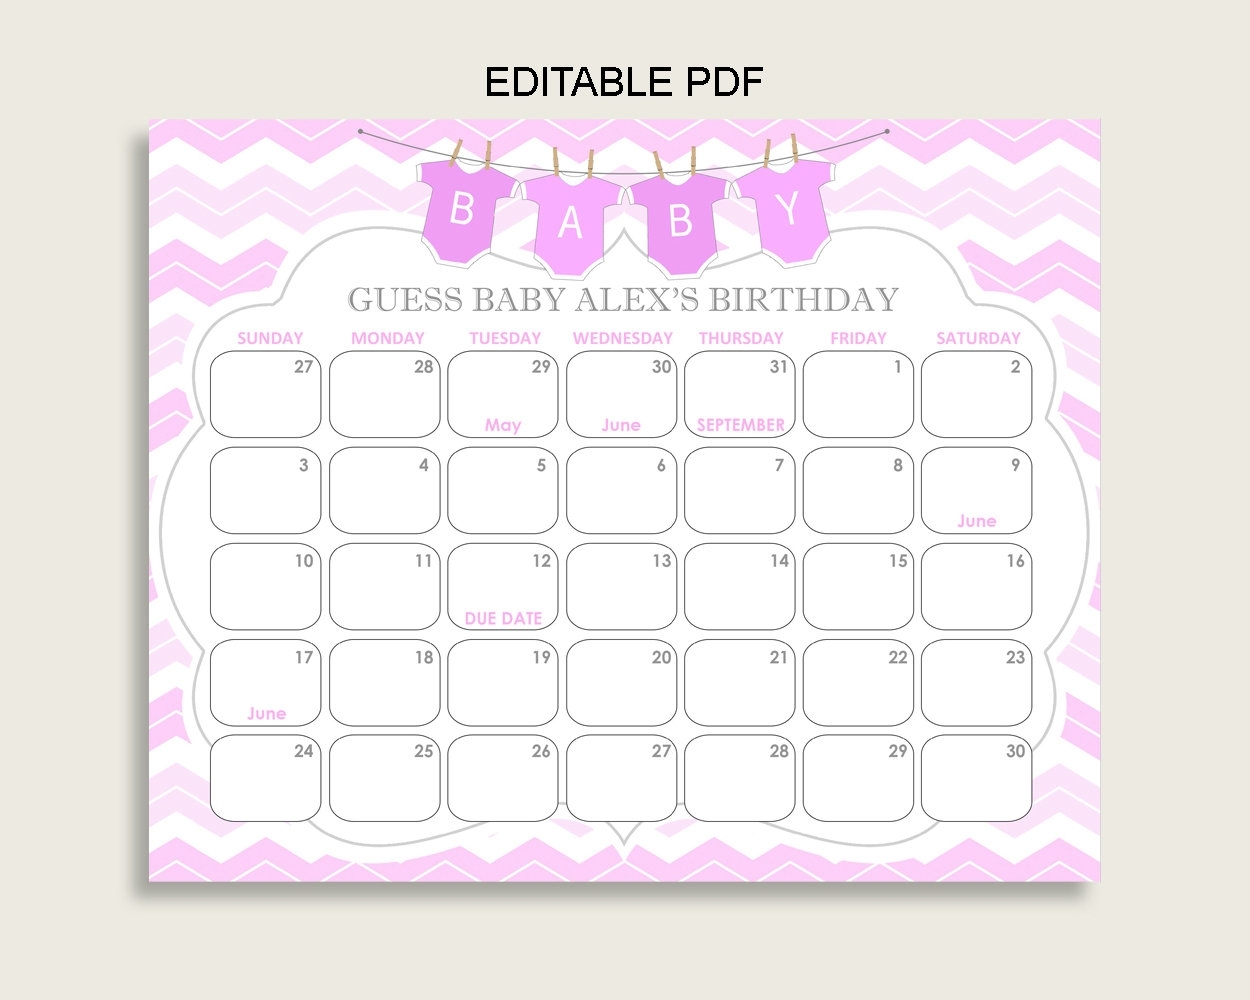 babies due date guess large print out 60